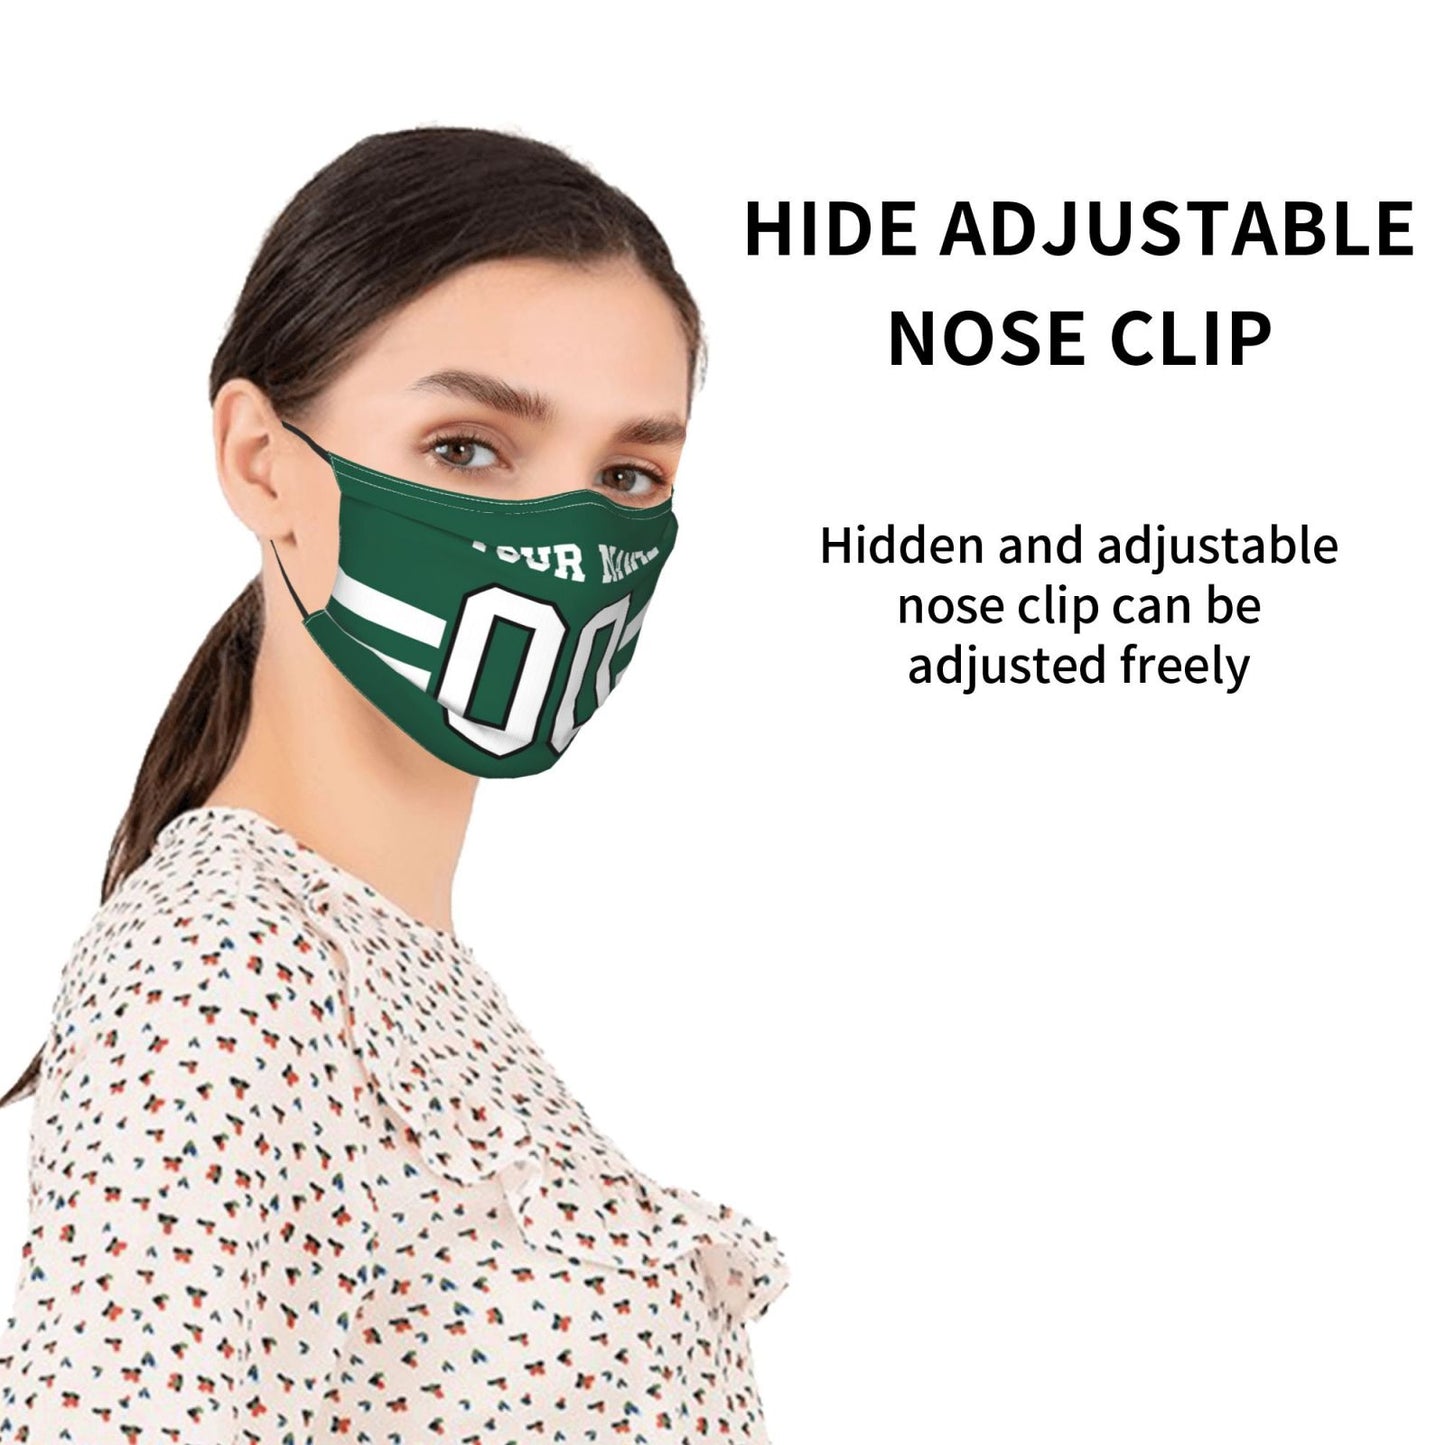 2-Pack New York Jets Face Covering Football Team Decorative Adult Face Mask With Filters PM 2.5 Green